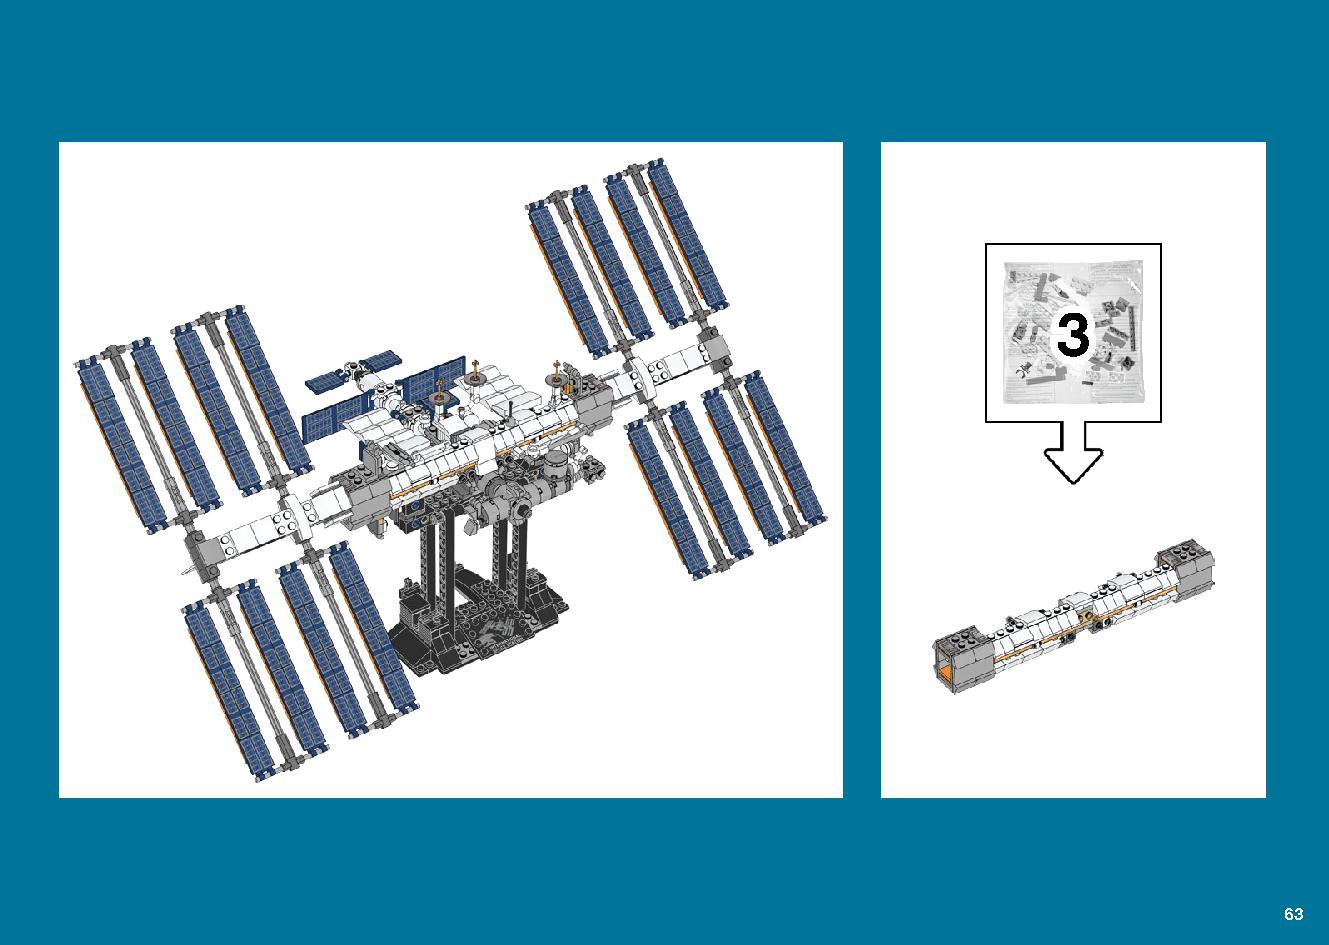 International Space Station 21321 LEGO information LEGO instructions 63 page